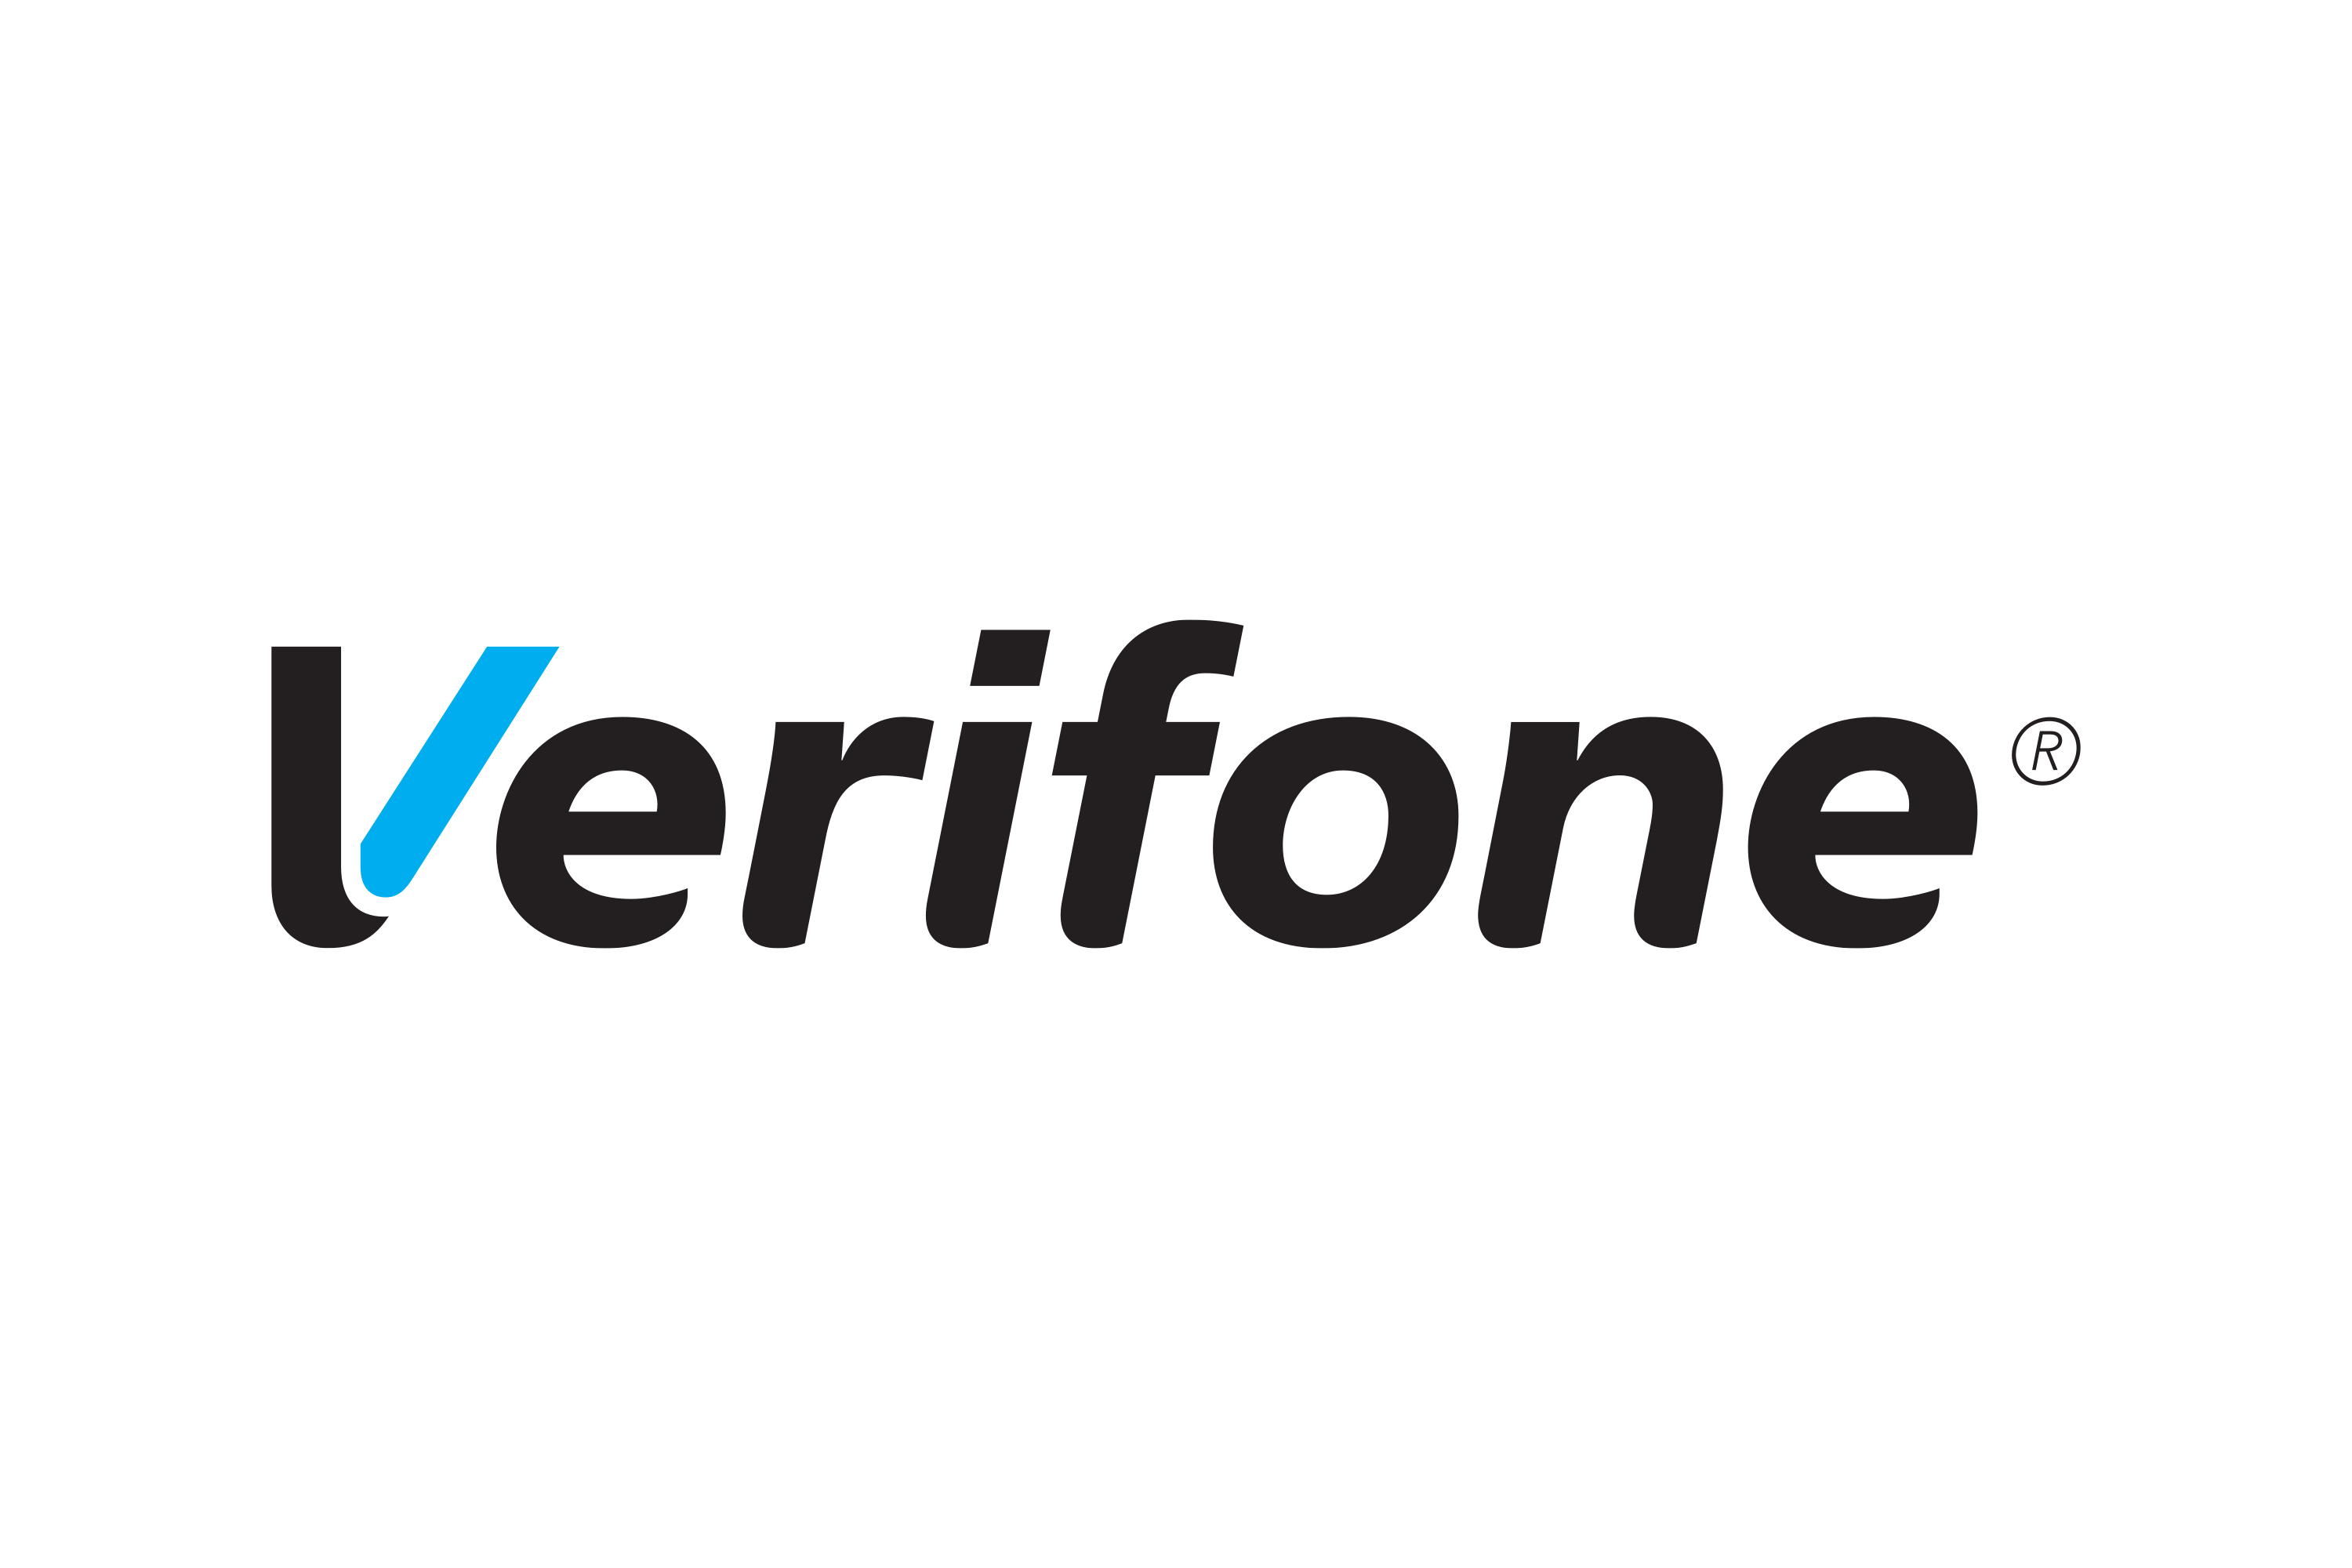 Your payments will be securely processed by Verifone